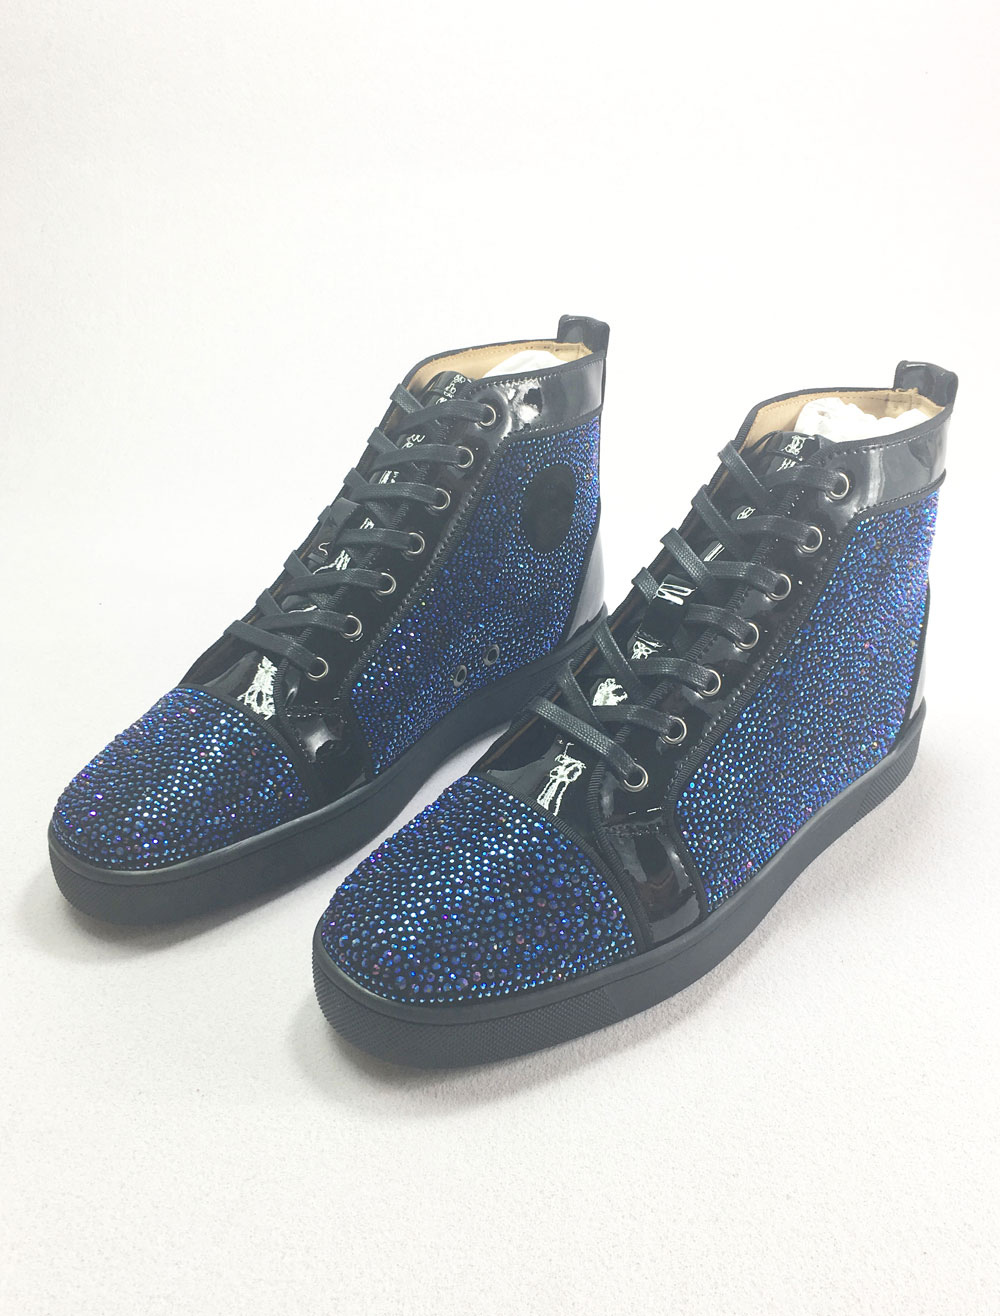 Men's Blue Leather High Top Prom Party Sneakers Shoes with Rhinestones ...